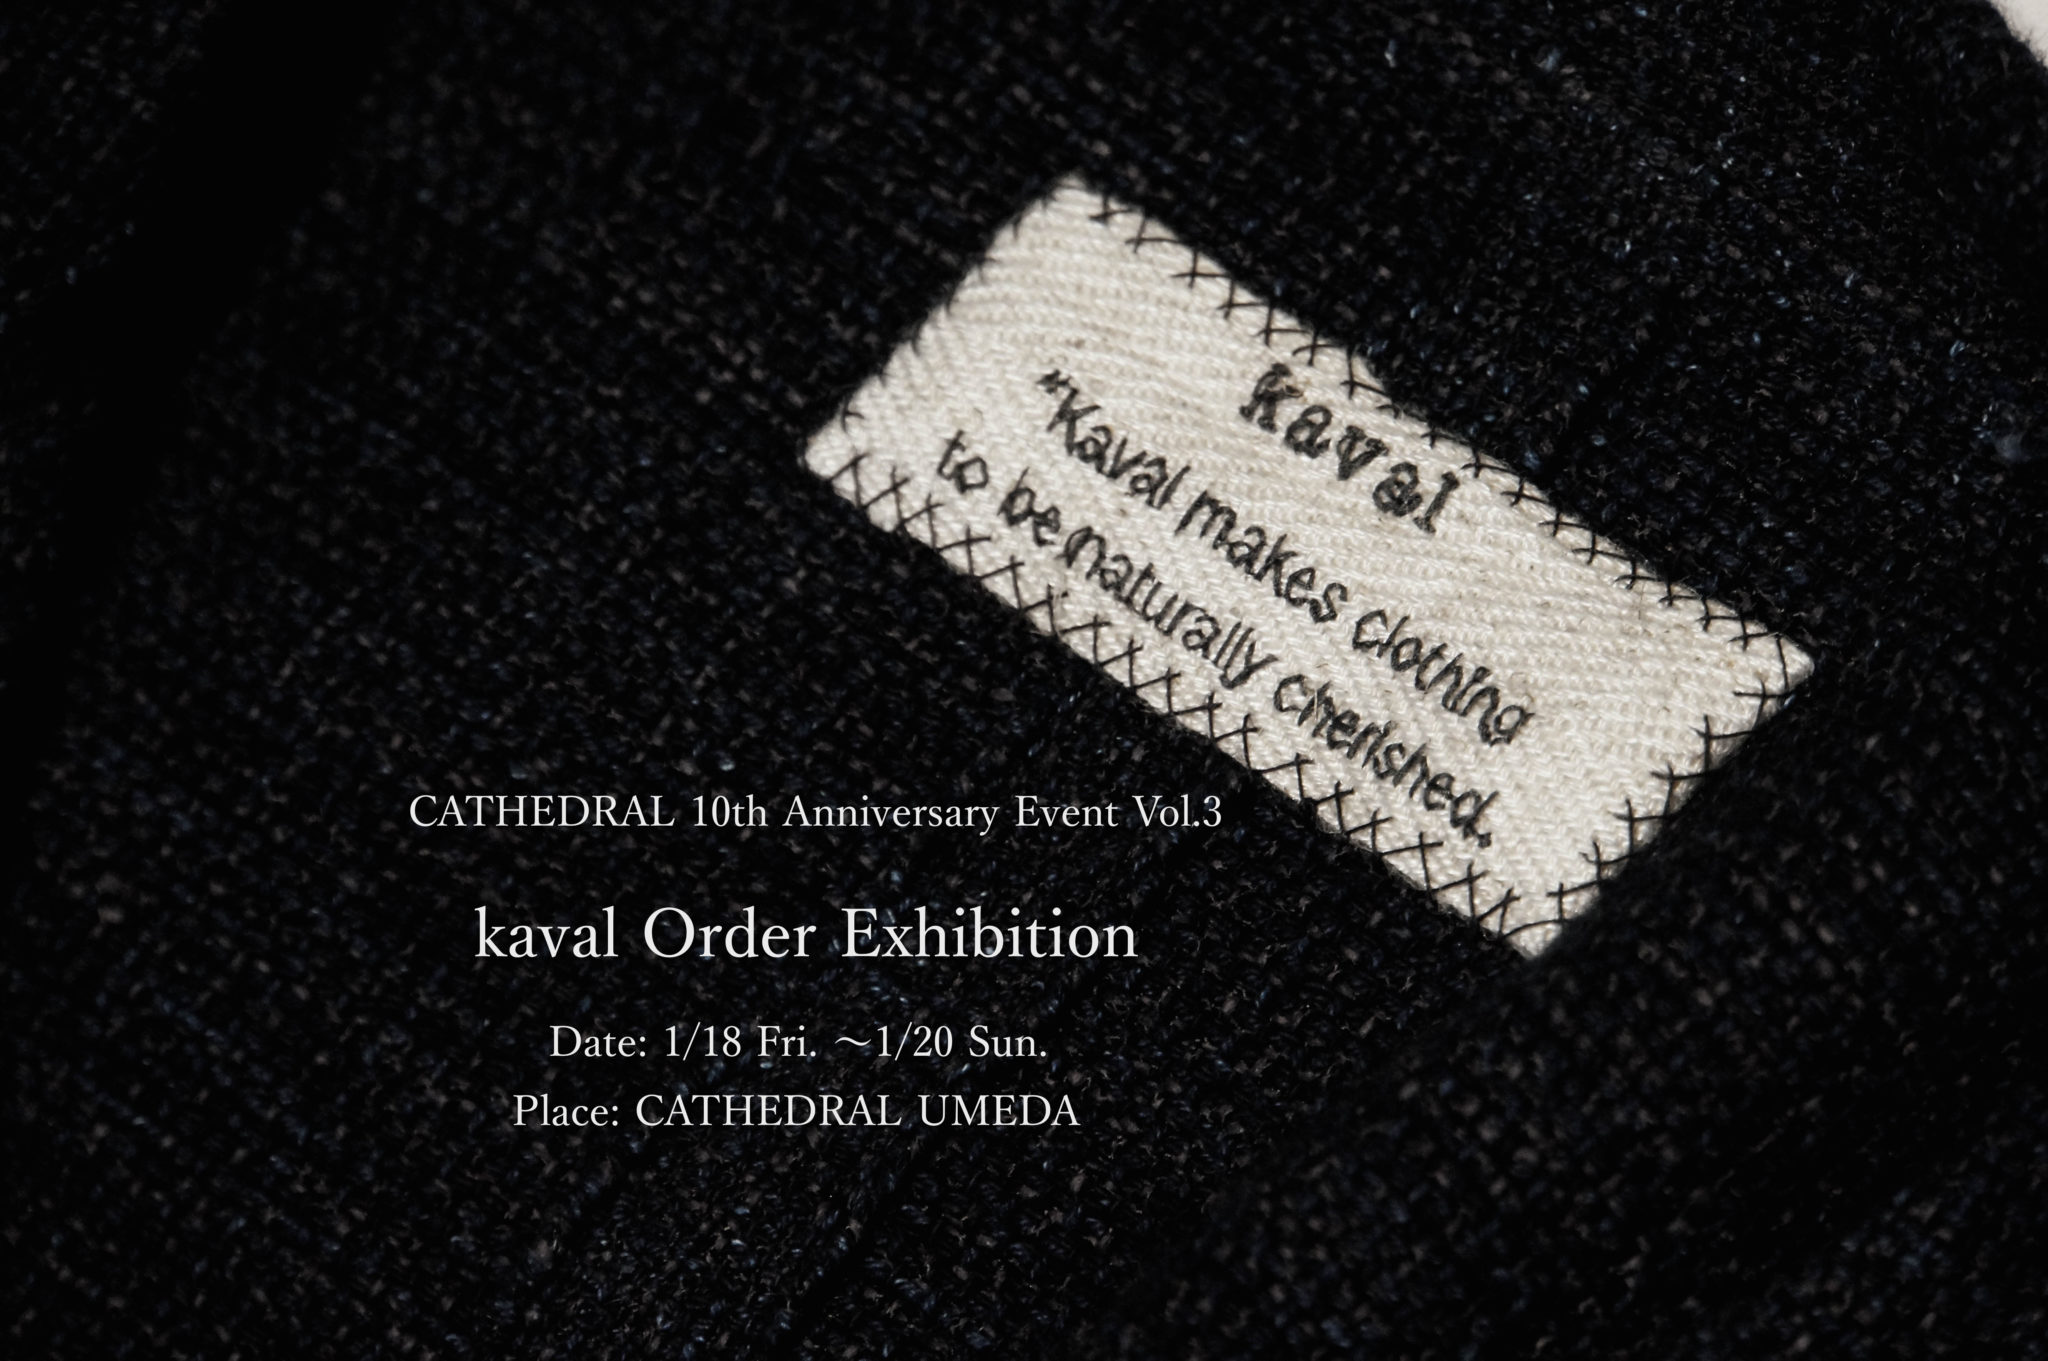 kaval Order Exhibition (CATHEDRAL 10th  Anniversary Event Vol.3)